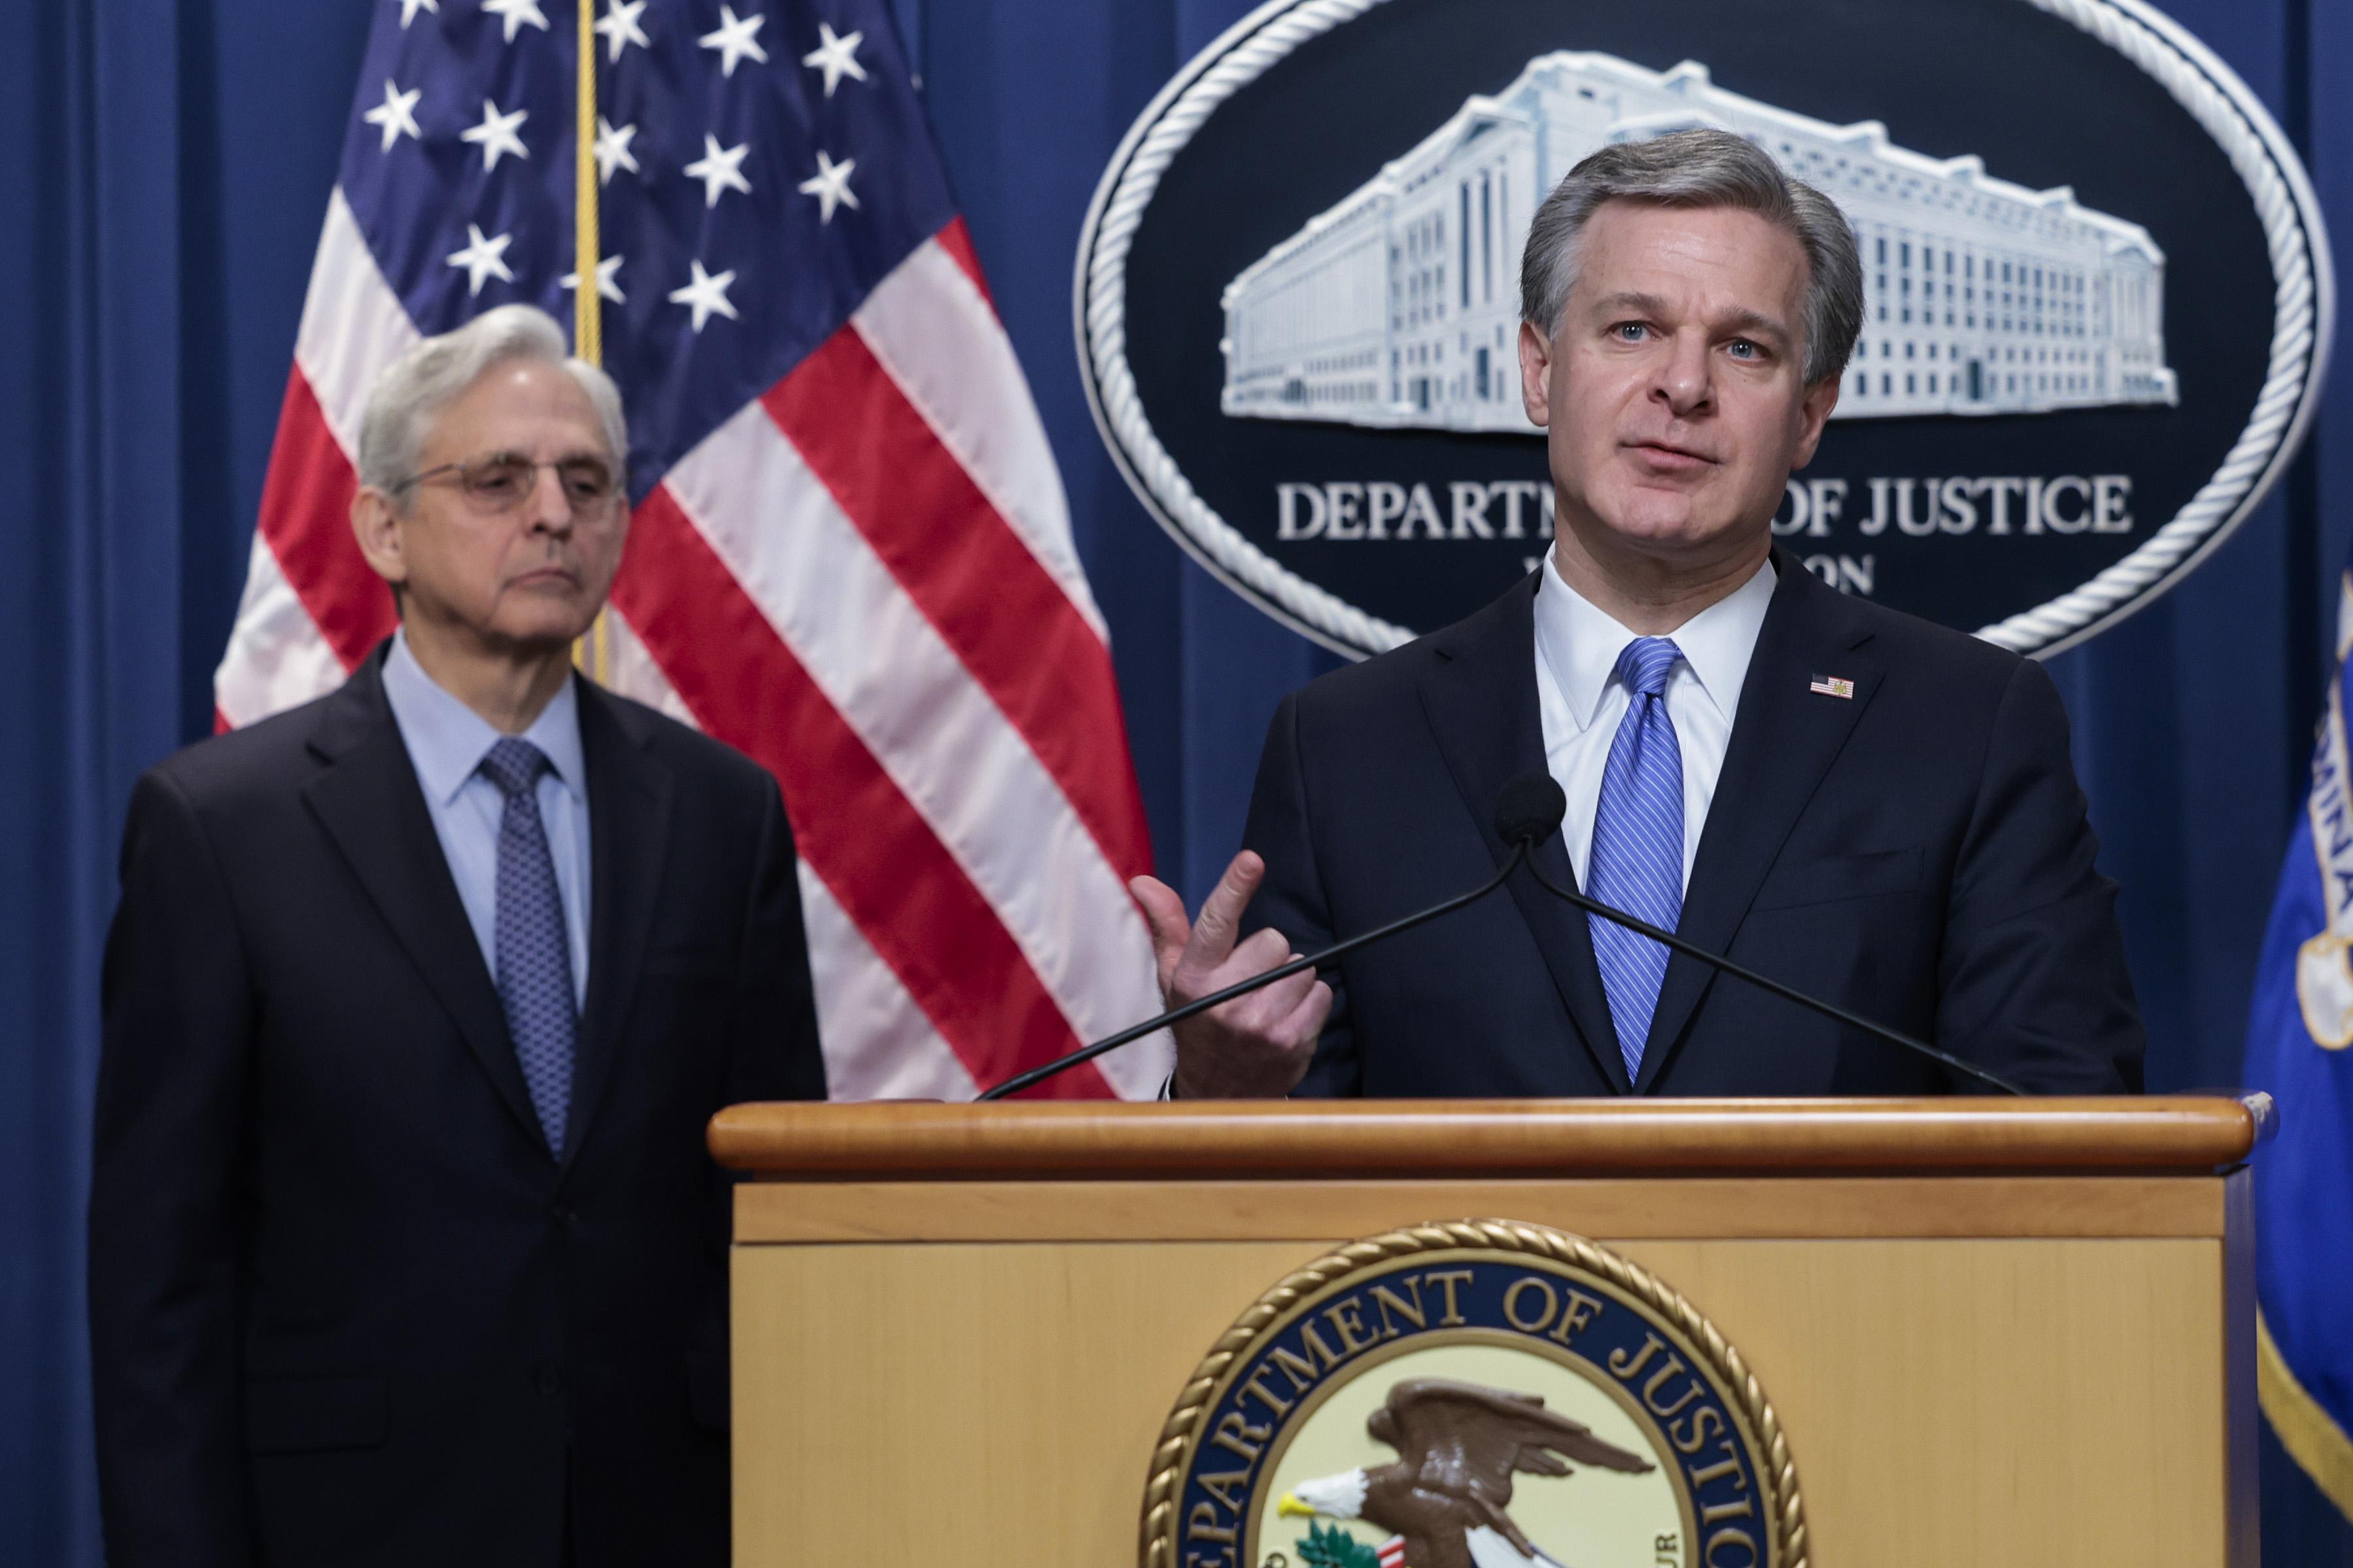 Wray points and speaks and Garland looks on. A Department of-Justice seal is on the podium in front of Wray, and curtain behind him.